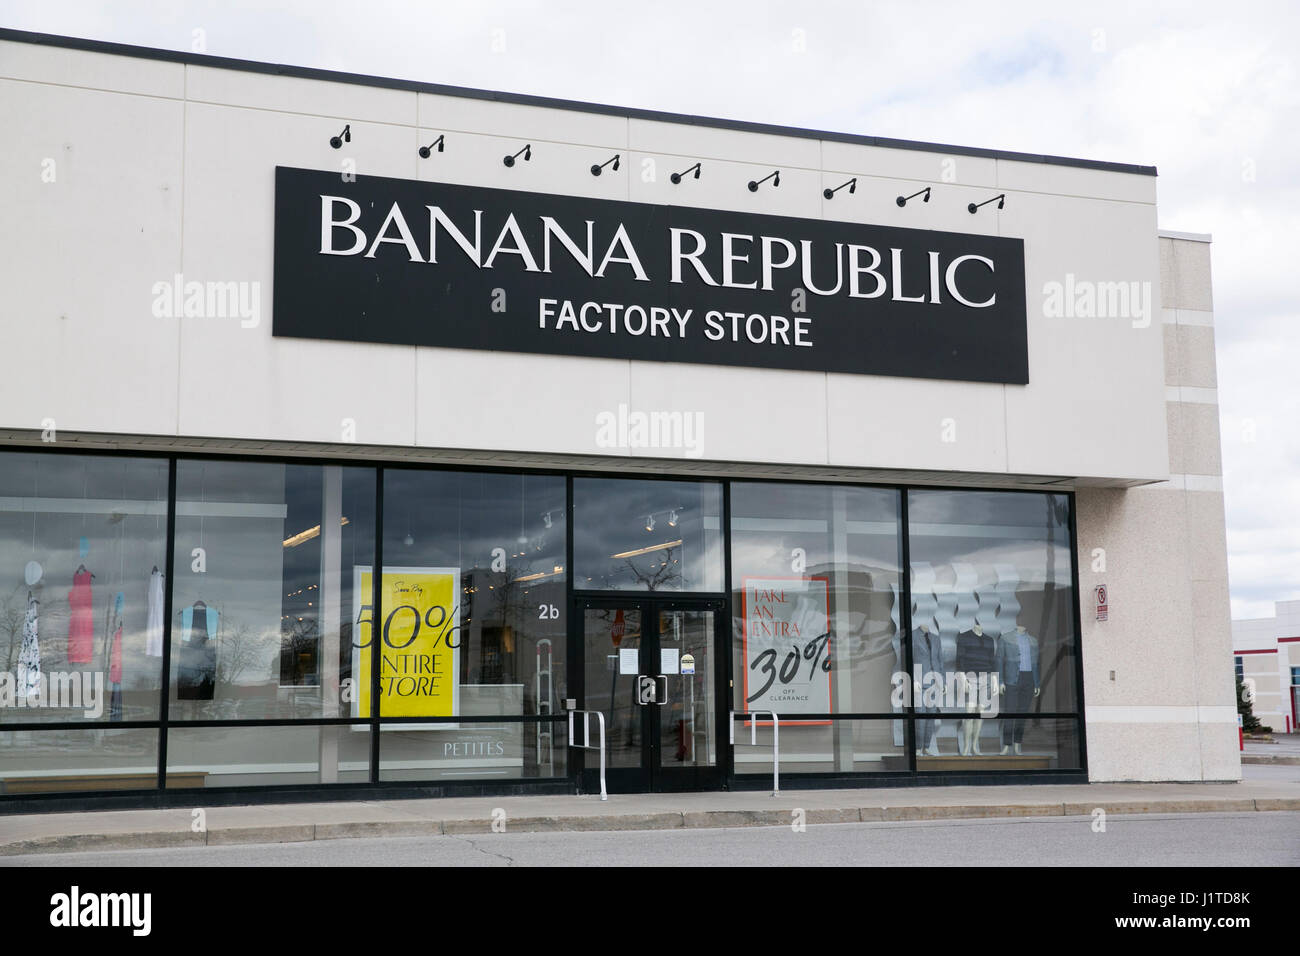 A logo sign outside of a Banana Republic Factory retail store in Mississauga, Ontario, Canada, on April 16, 2017. Stock Photo